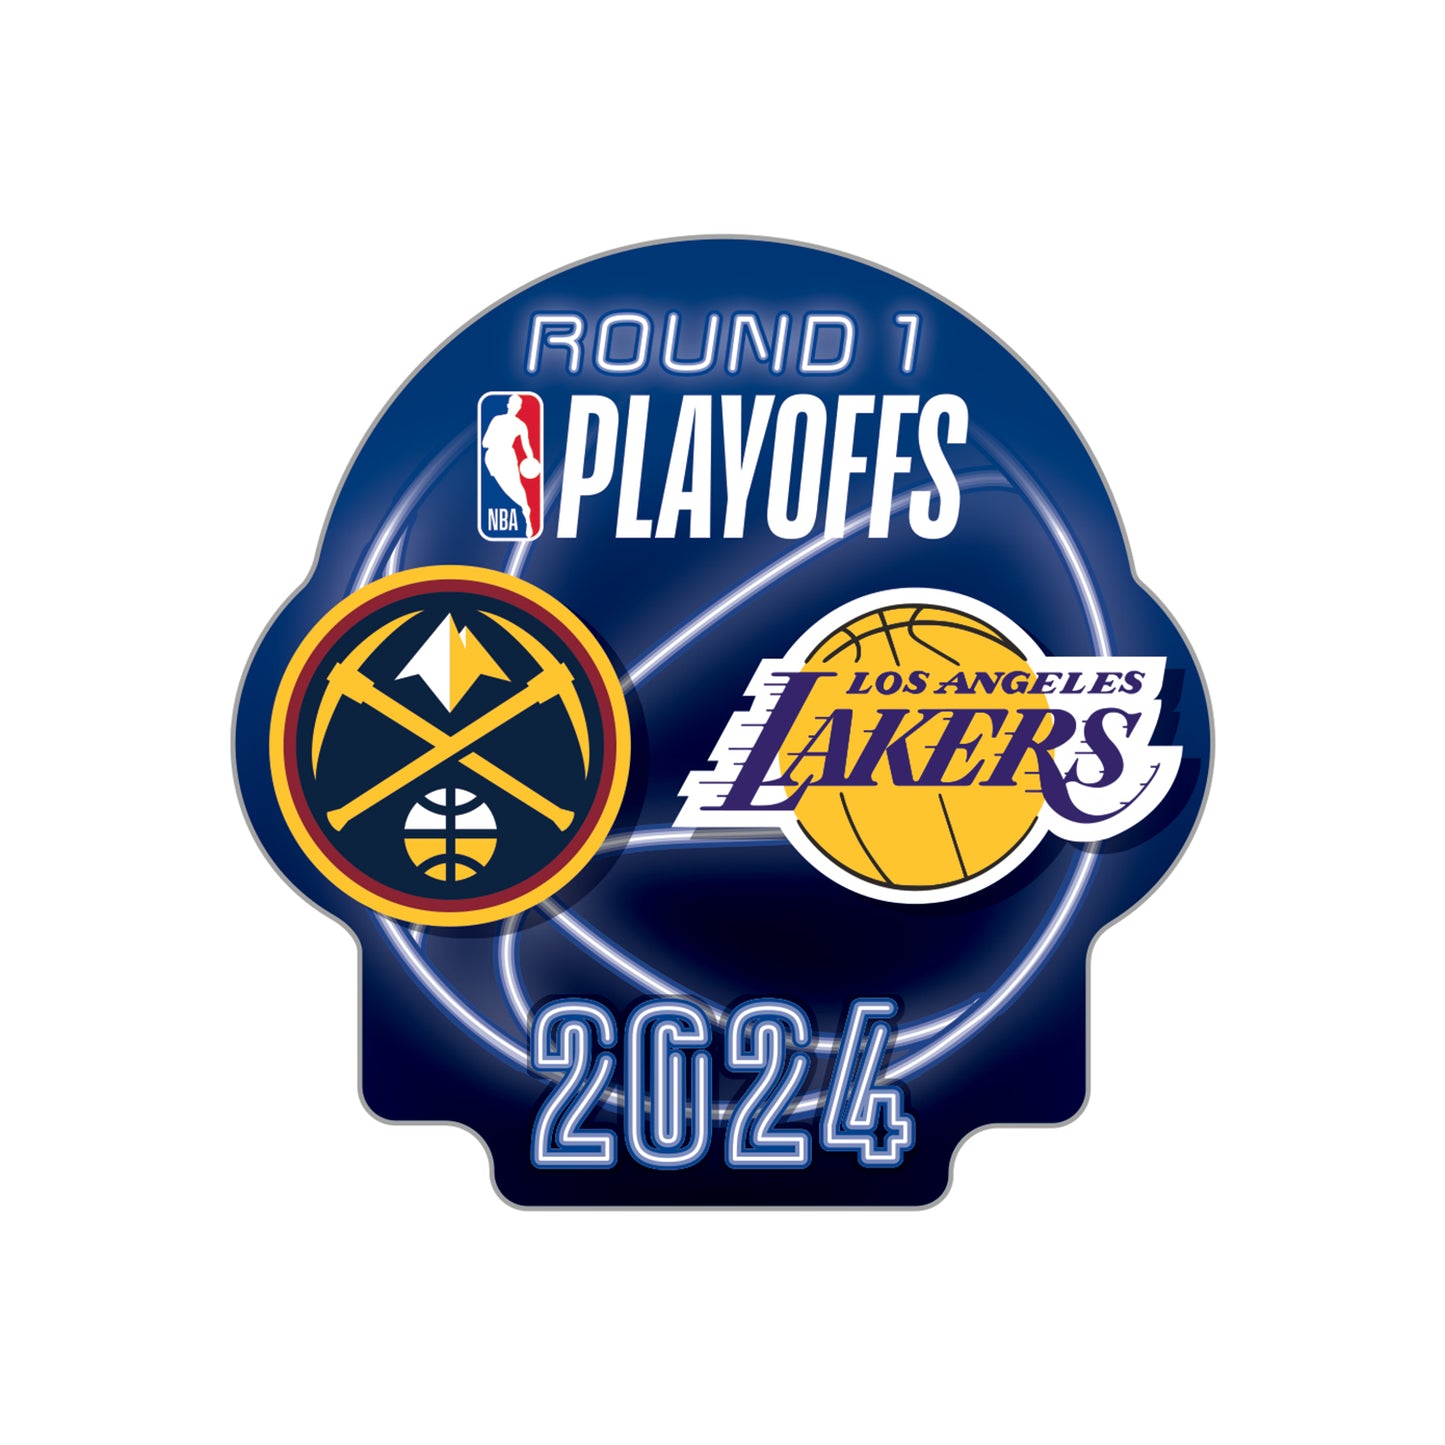 2024 Nuggets NBA Playoff 2 Team Lapel Pin Round 1